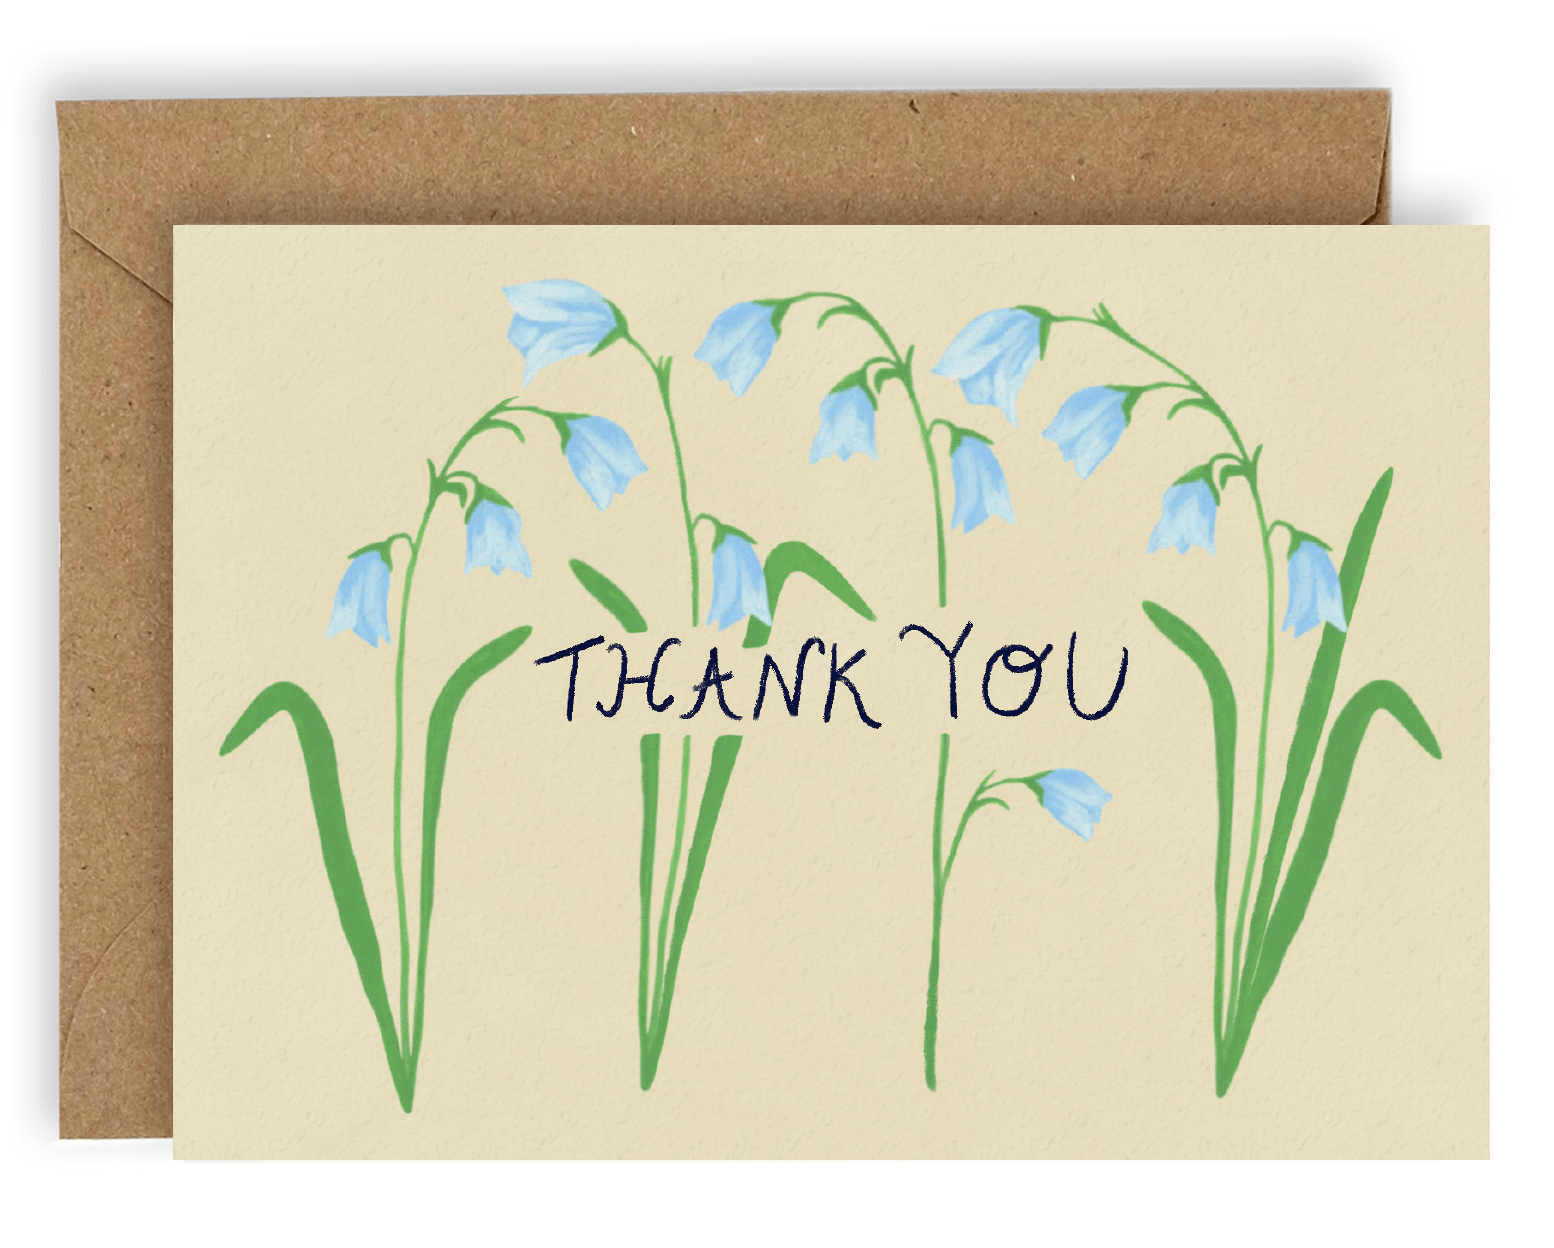 Four drooping blue forest flowers cover the card nearly top to bottom horizontally, with the words "Thank You" going through the center of them in black ink. This design is printed on a cream colored background. Shown with Kraft envelope.